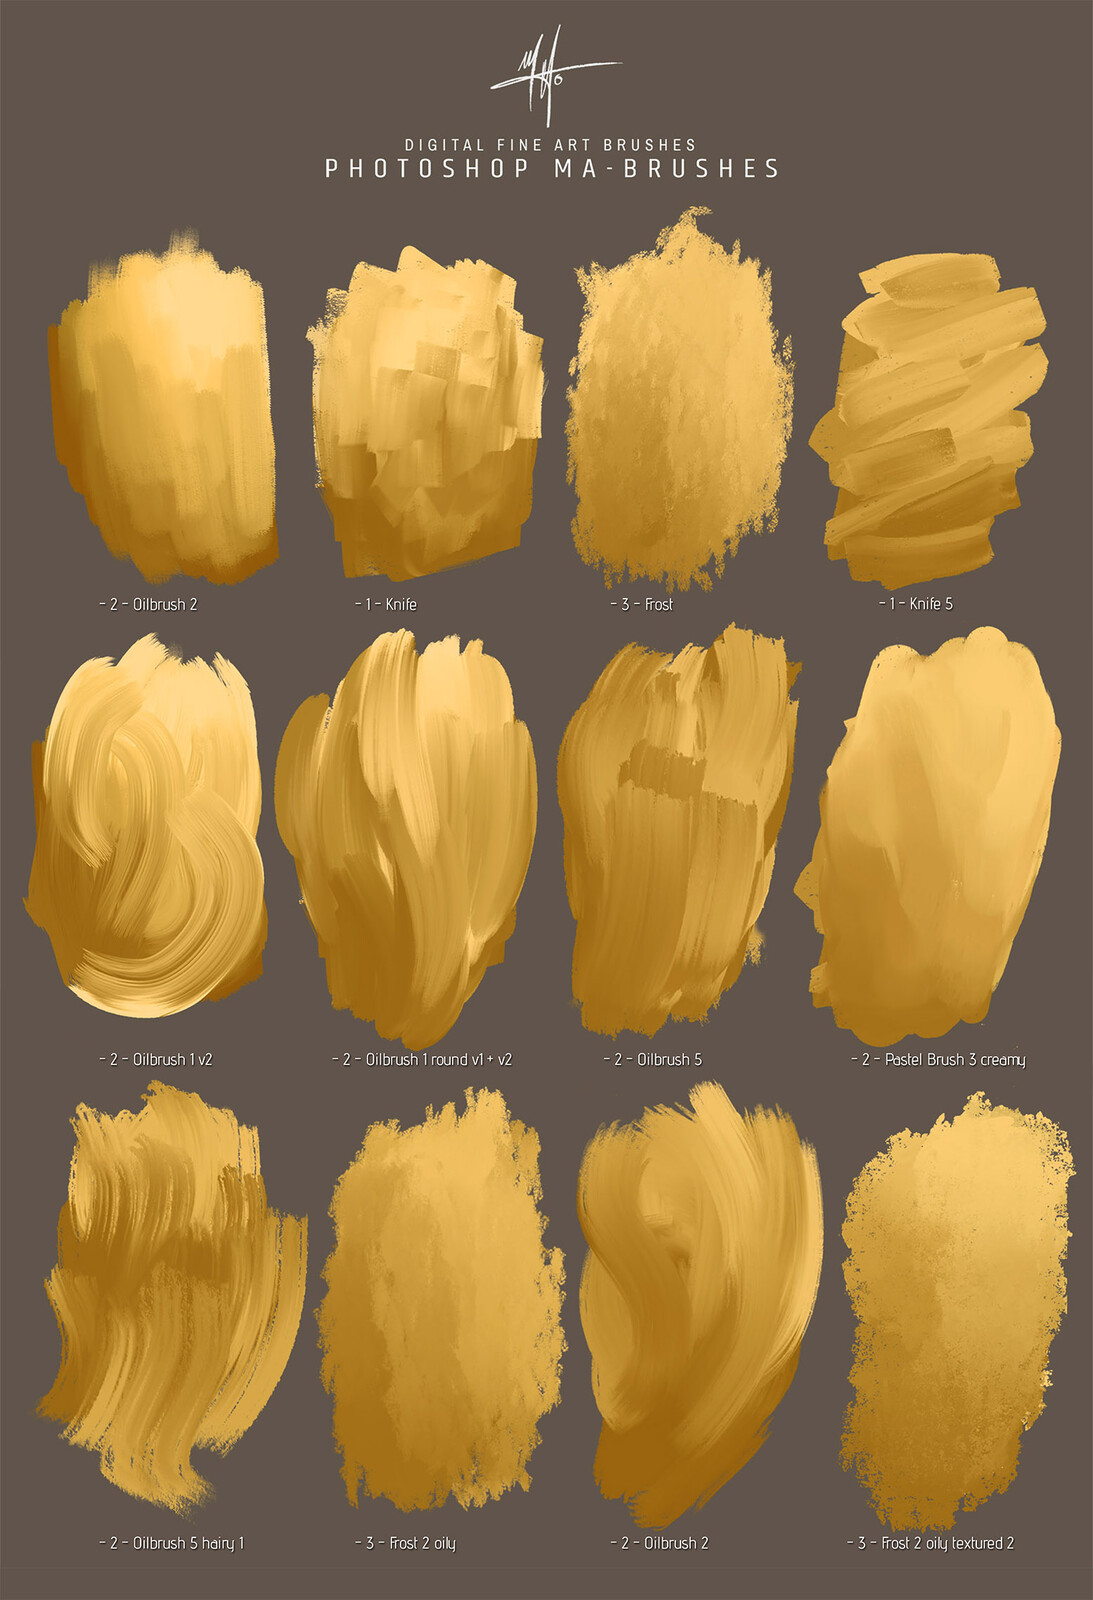 Photoshop Oil Brushes for digital Art Paintings - MA-BRUSHES